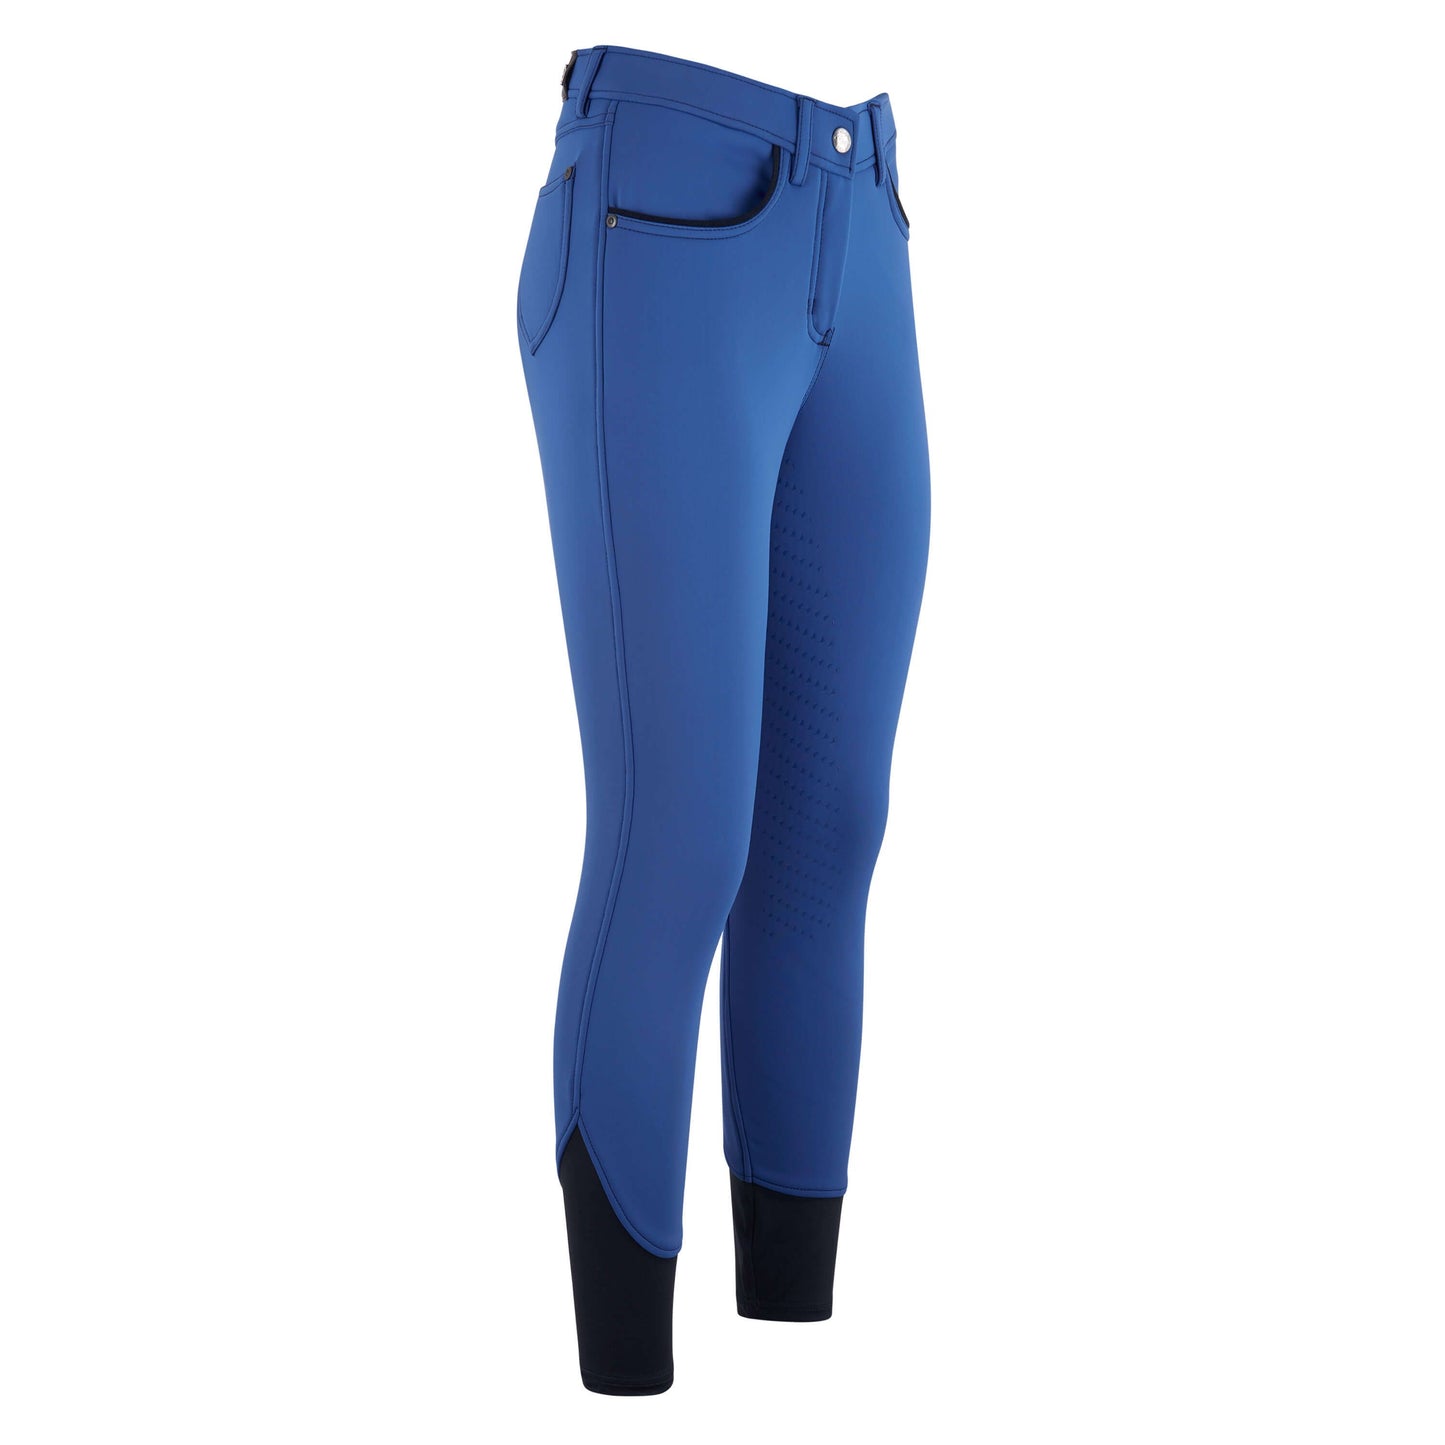 Easy Rider Royal Blue Xantippe Breeches with Full Silicone Seat